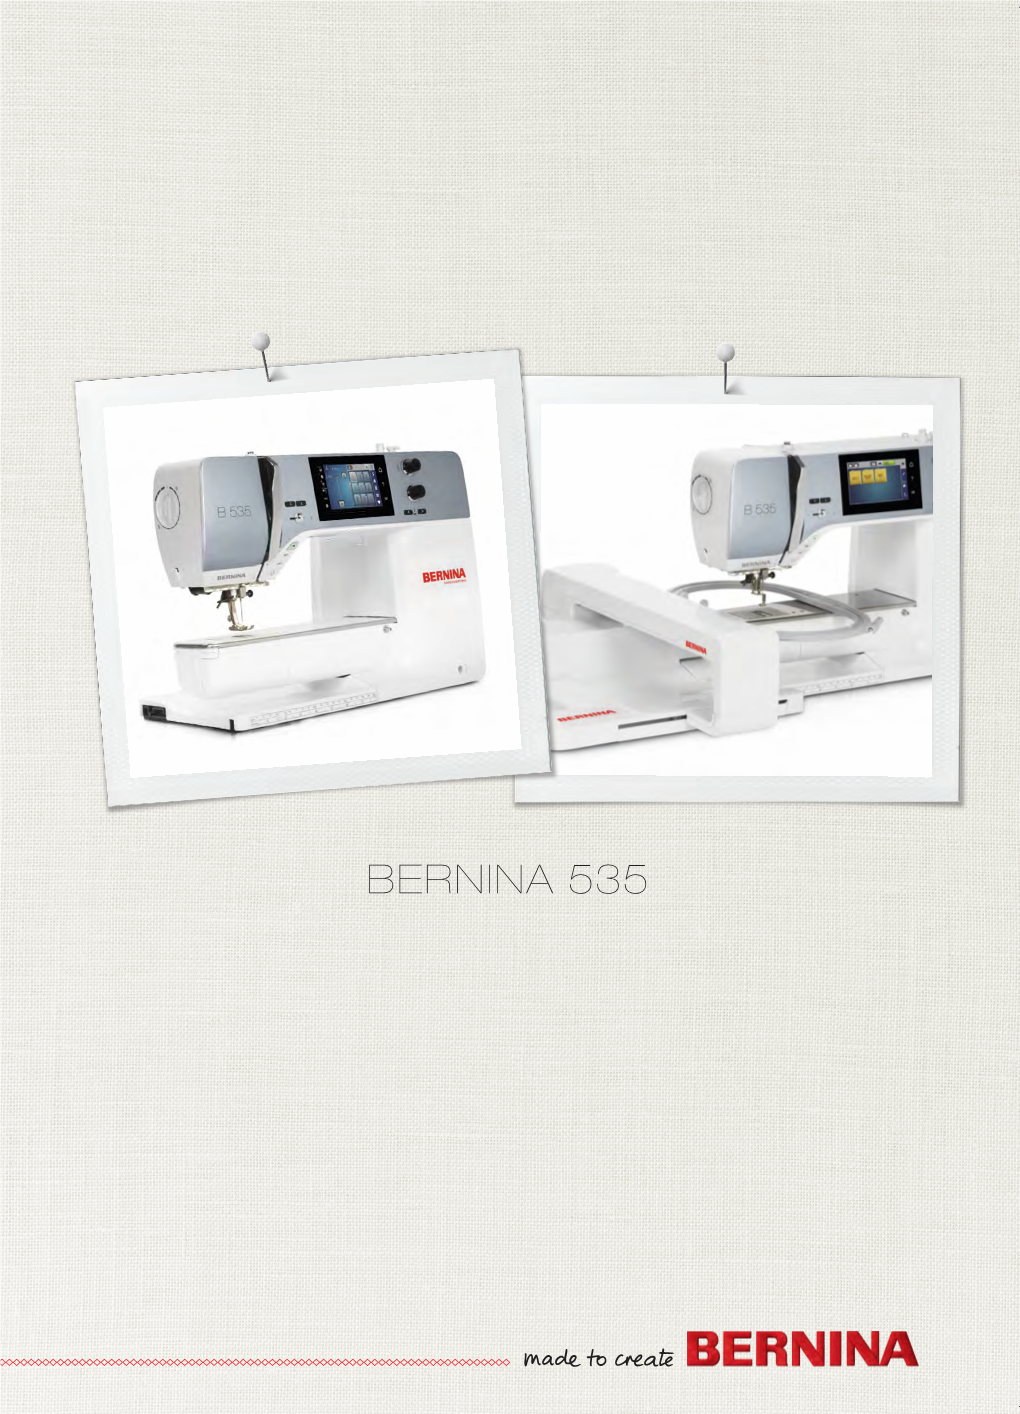 BERNINA 535 LOOKING for a NEW SEWING PROJECT? You Can Find What You Want in “Inspiration”, Our Sewing Magazine